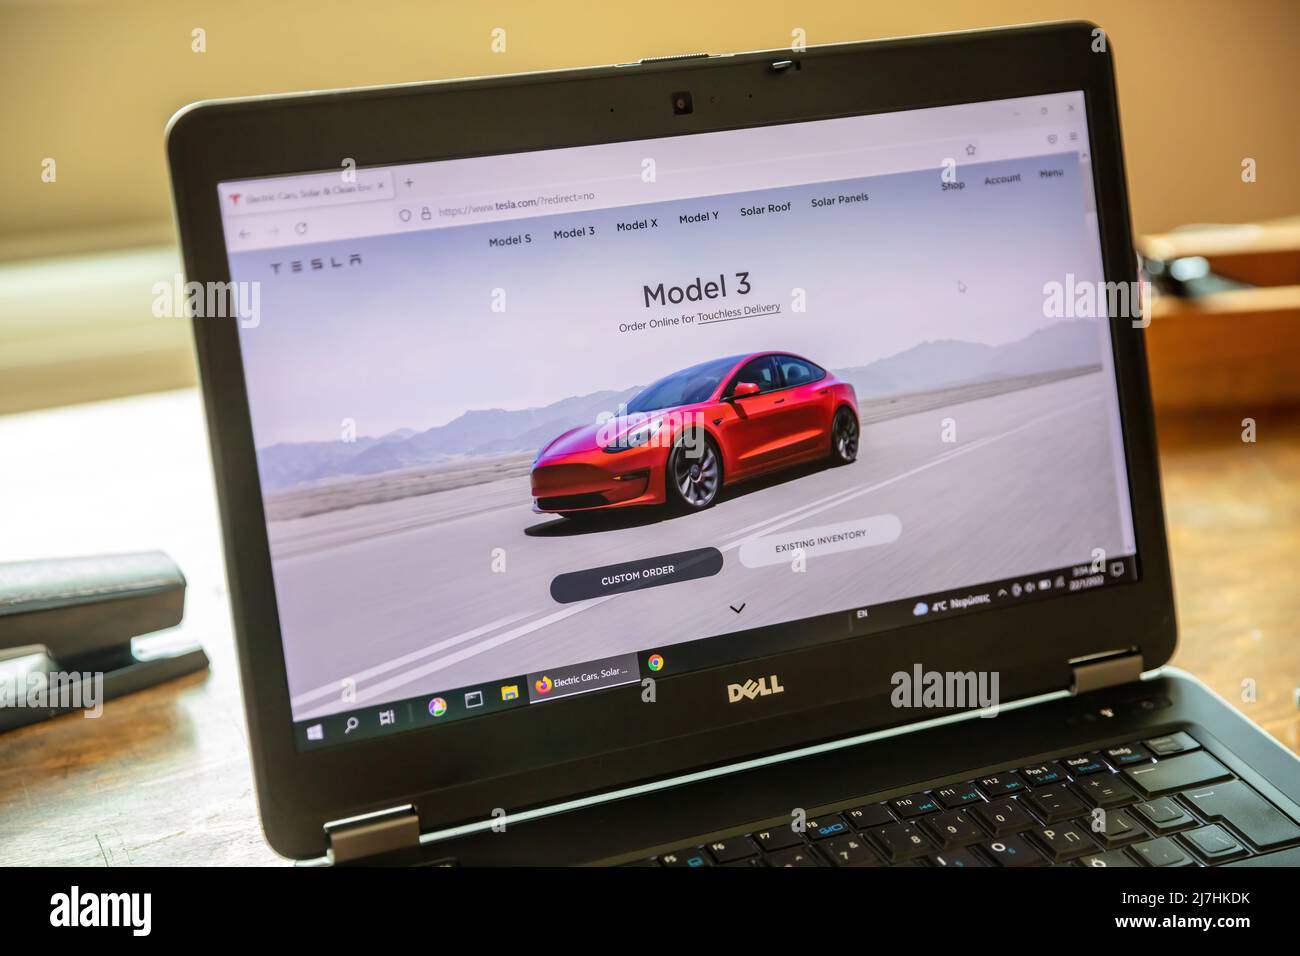 Greece, Athens, January 23 2022. TESLA CAR SELECTION. Ad, online red Tesla model 3 electric auto. Computer laptop on wooden table, close up view Stock Photo